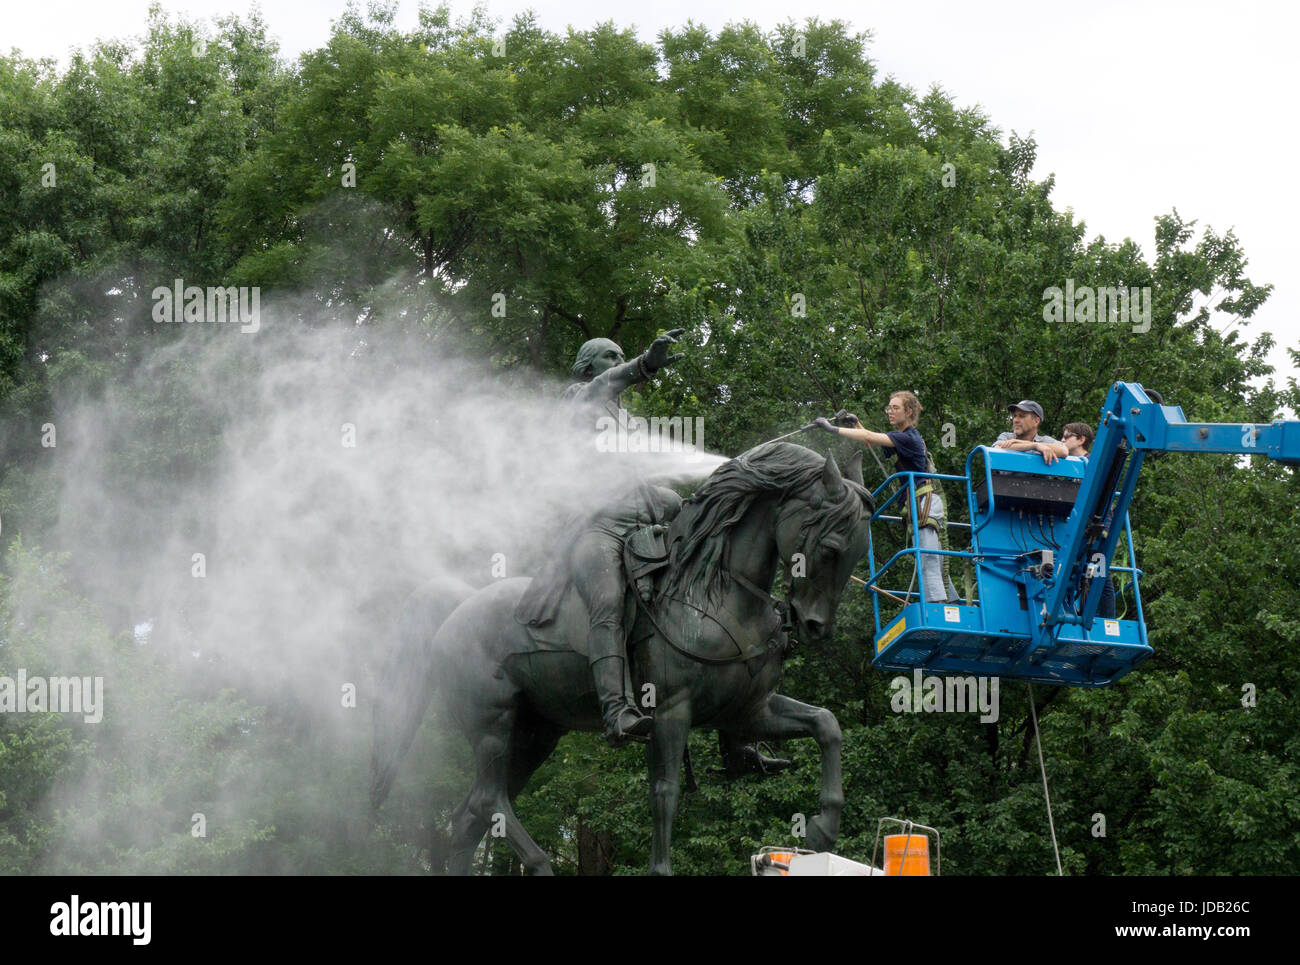 The statue of George Washington in Union Square Park getting its annual cleaning by a Parks Dept worker and an intern. Stock Photo